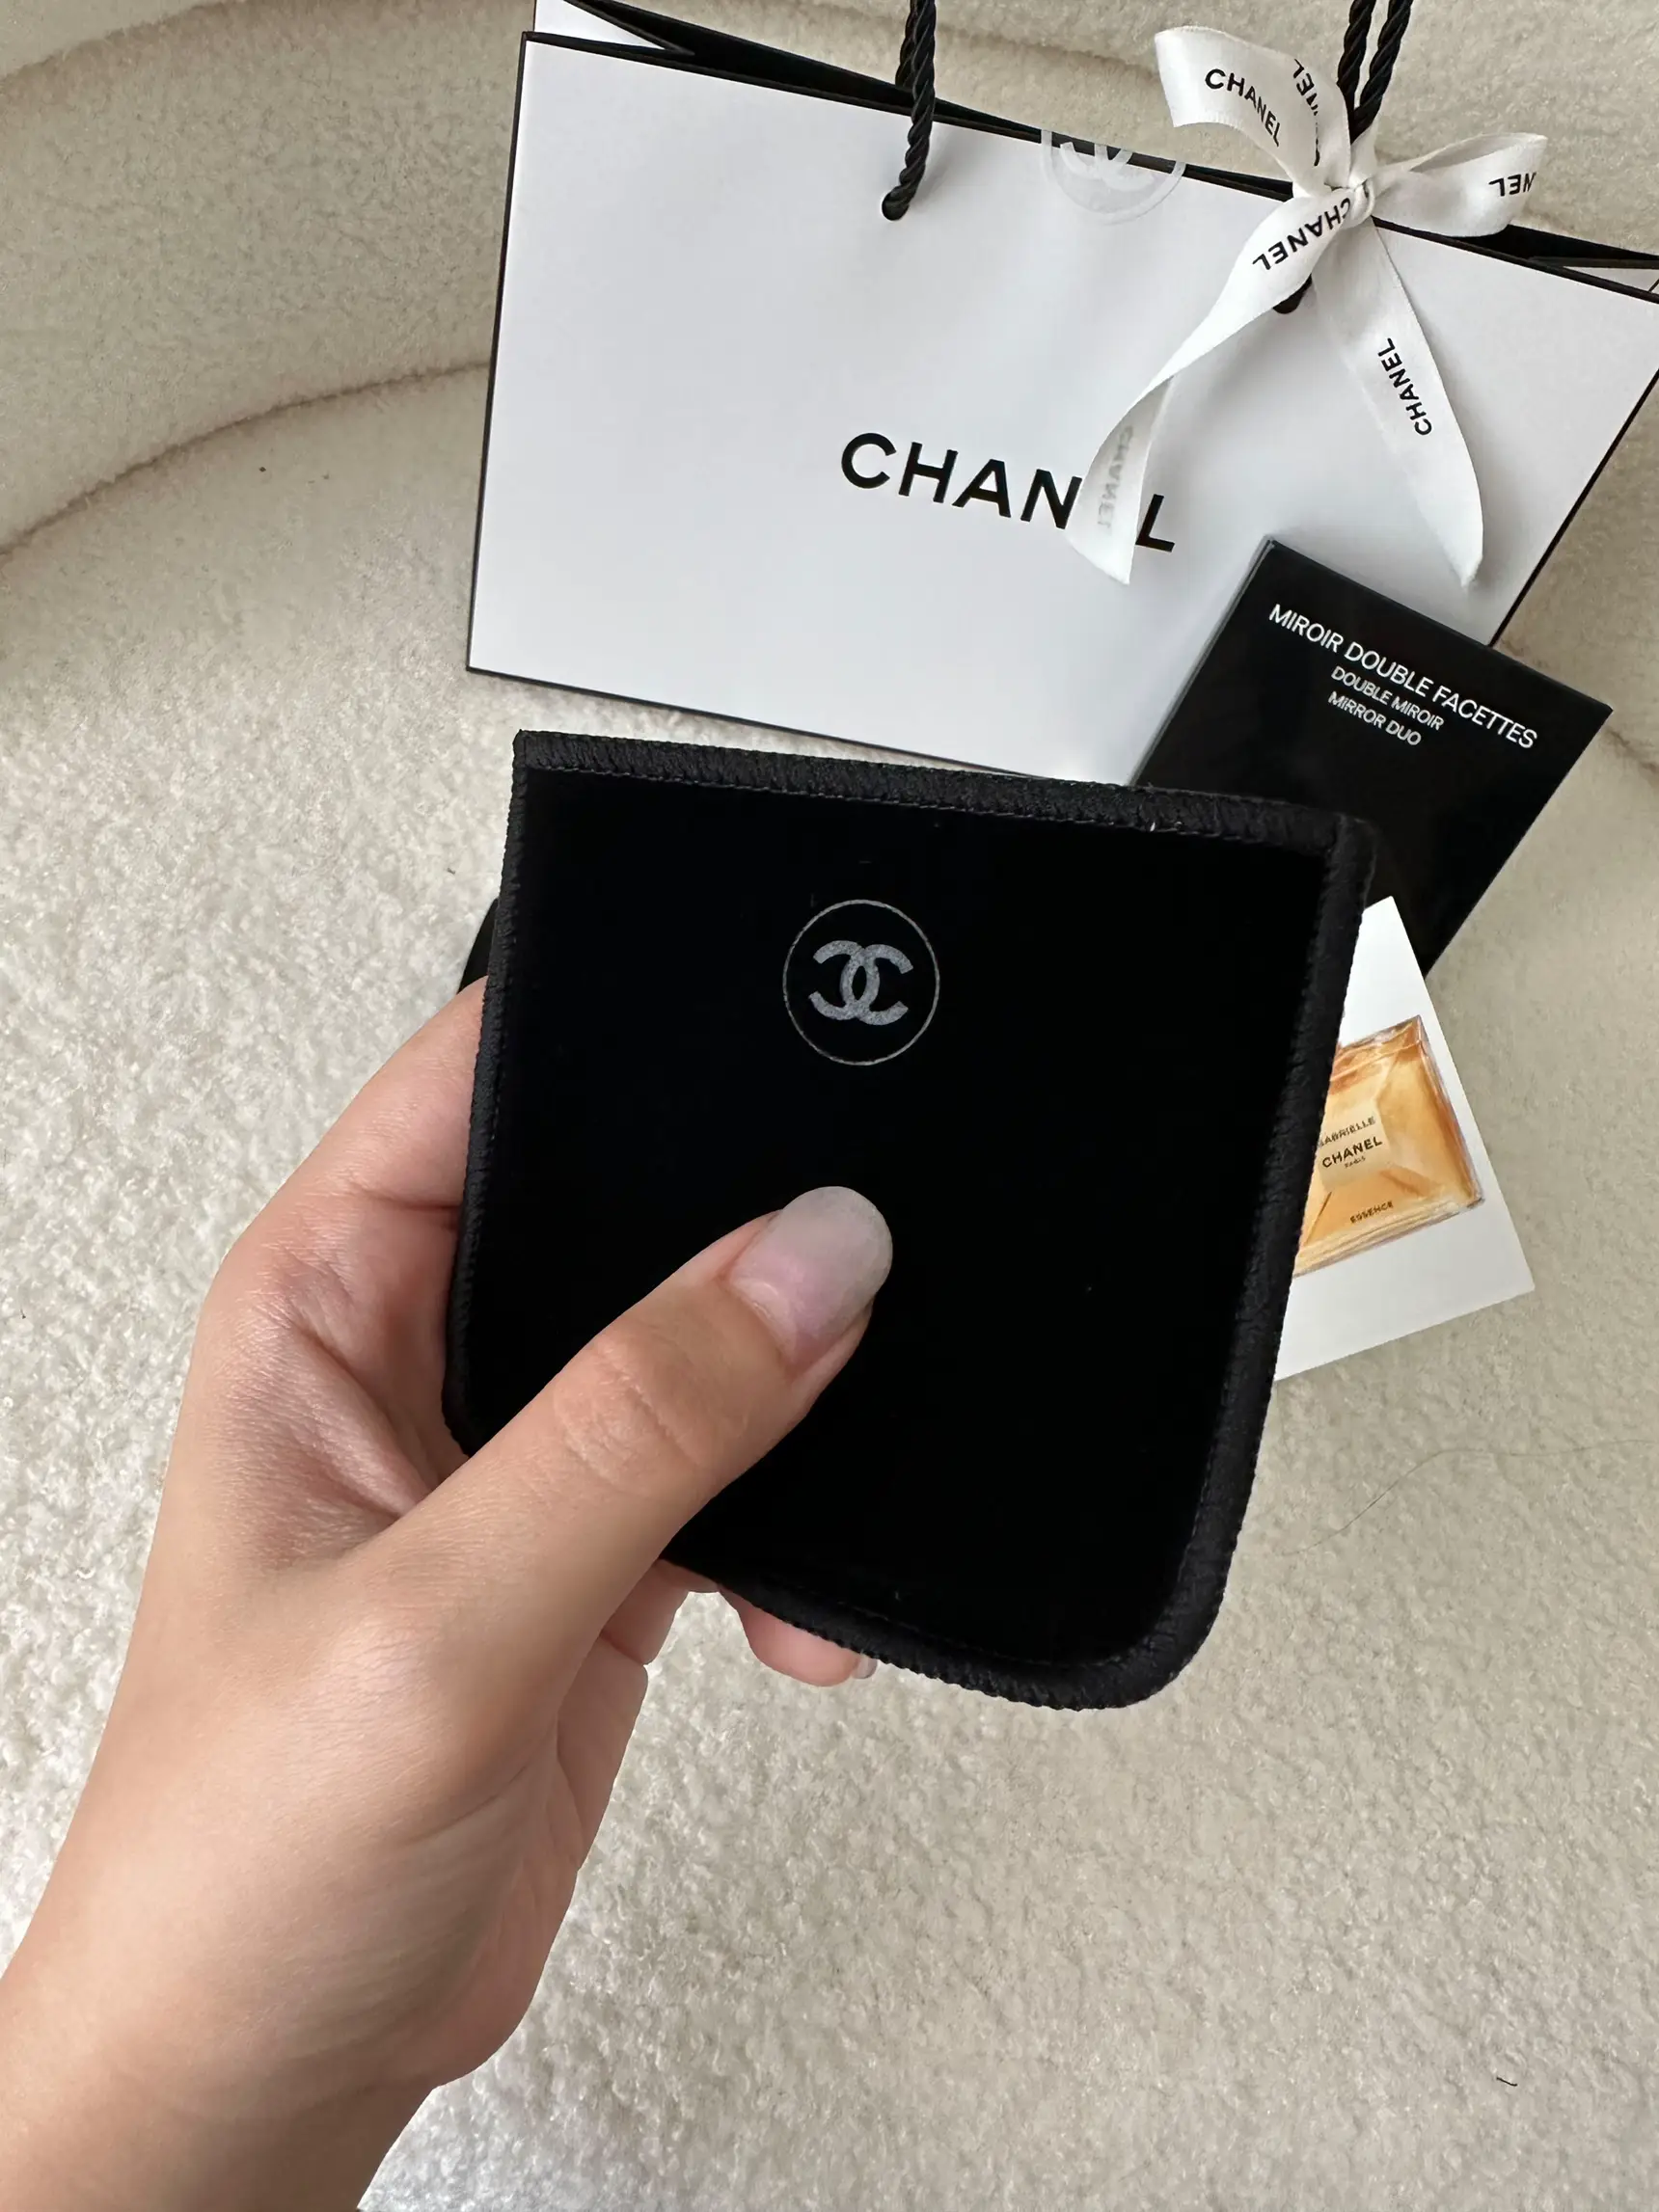 CHANEL MIRROR adds chic to the item in the bag. ✨😍, Gallery posted by  Fanggkhao